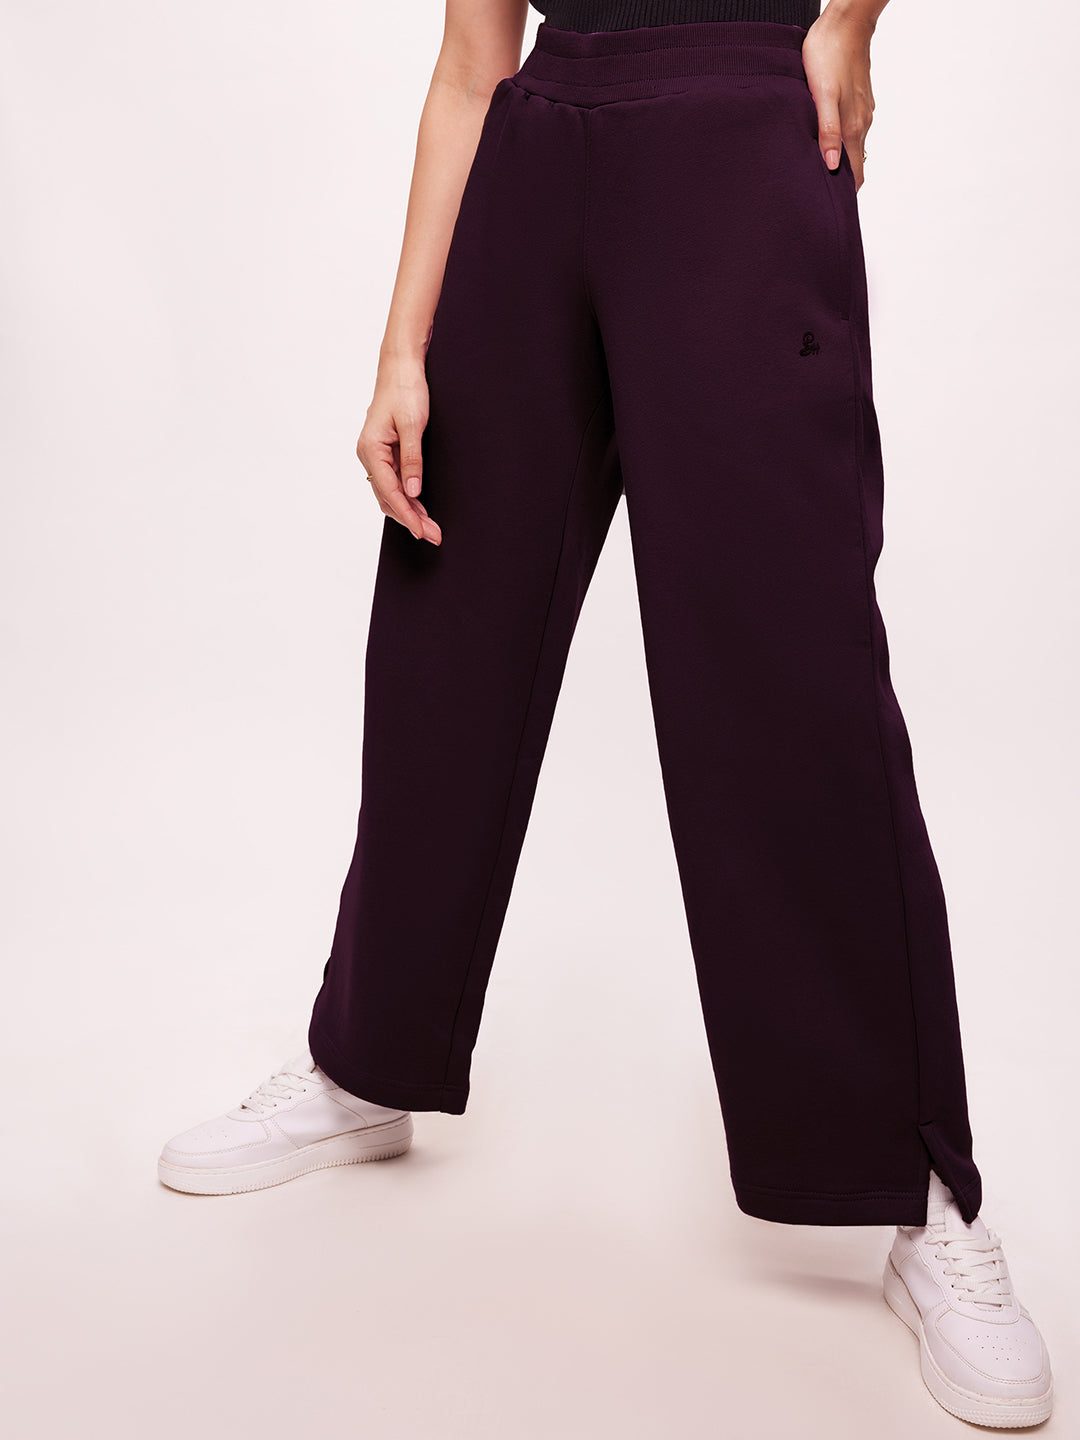 Bombay High Women's Maroon Premium Cotton Solid Knit Wide Leg All Day Pants